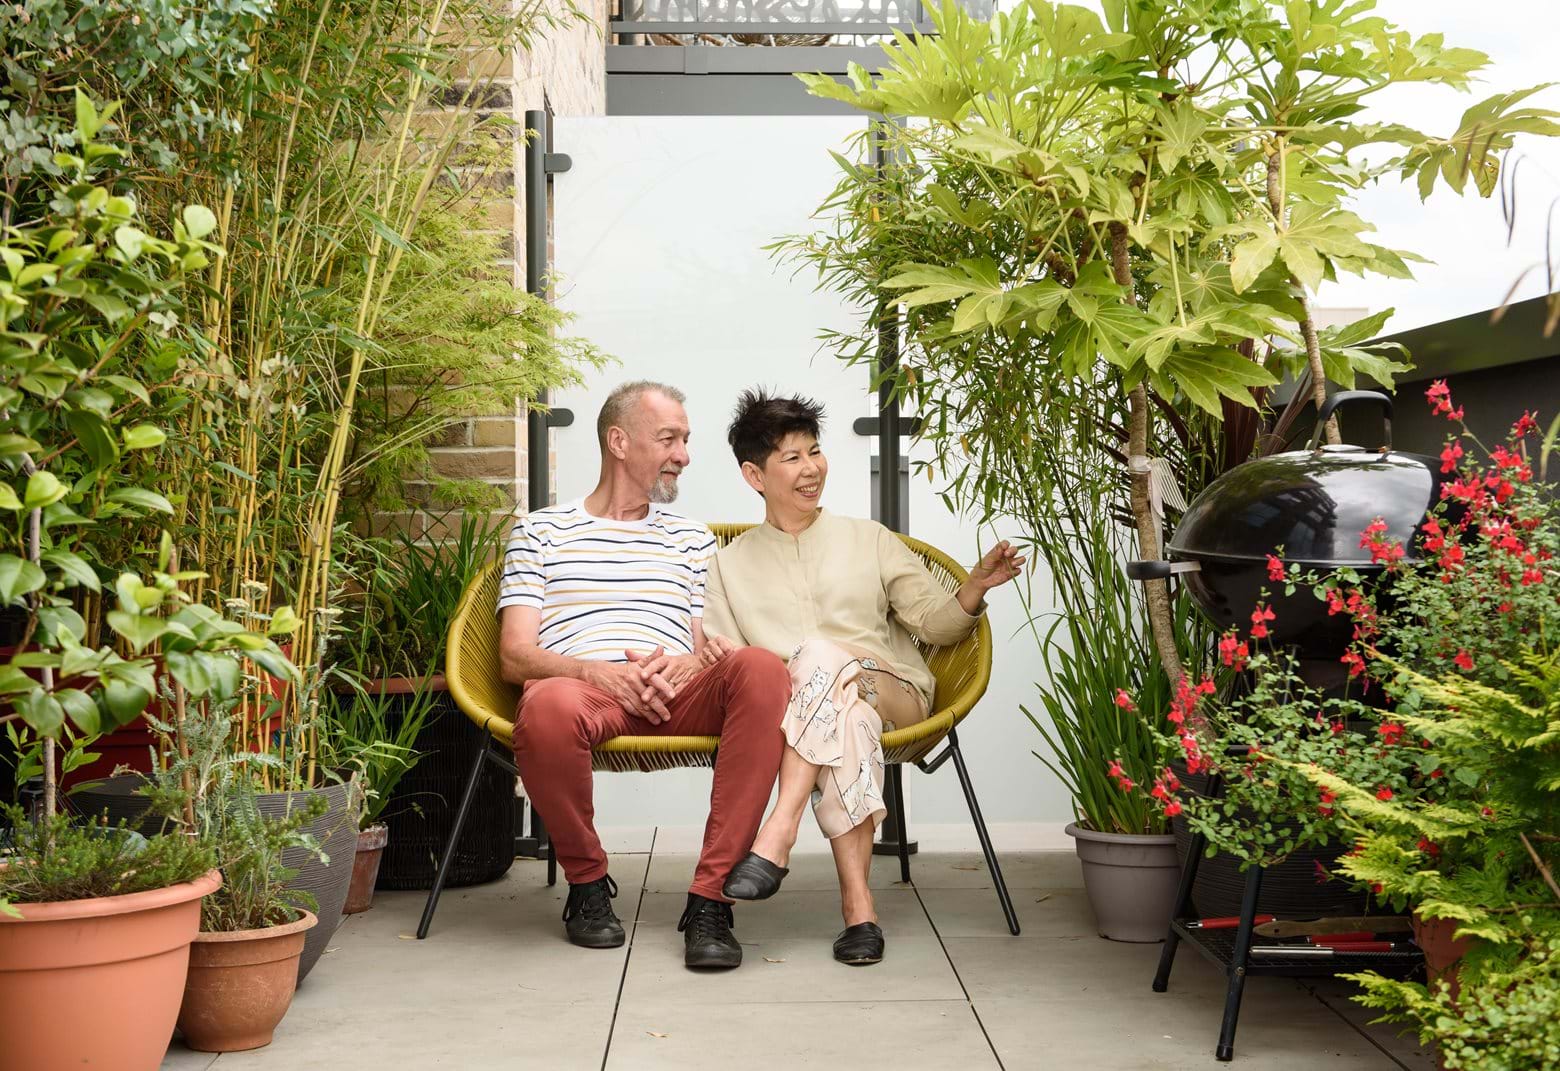 June and Greg enjoying their outdoor space filled with greenery at The Pomeroy